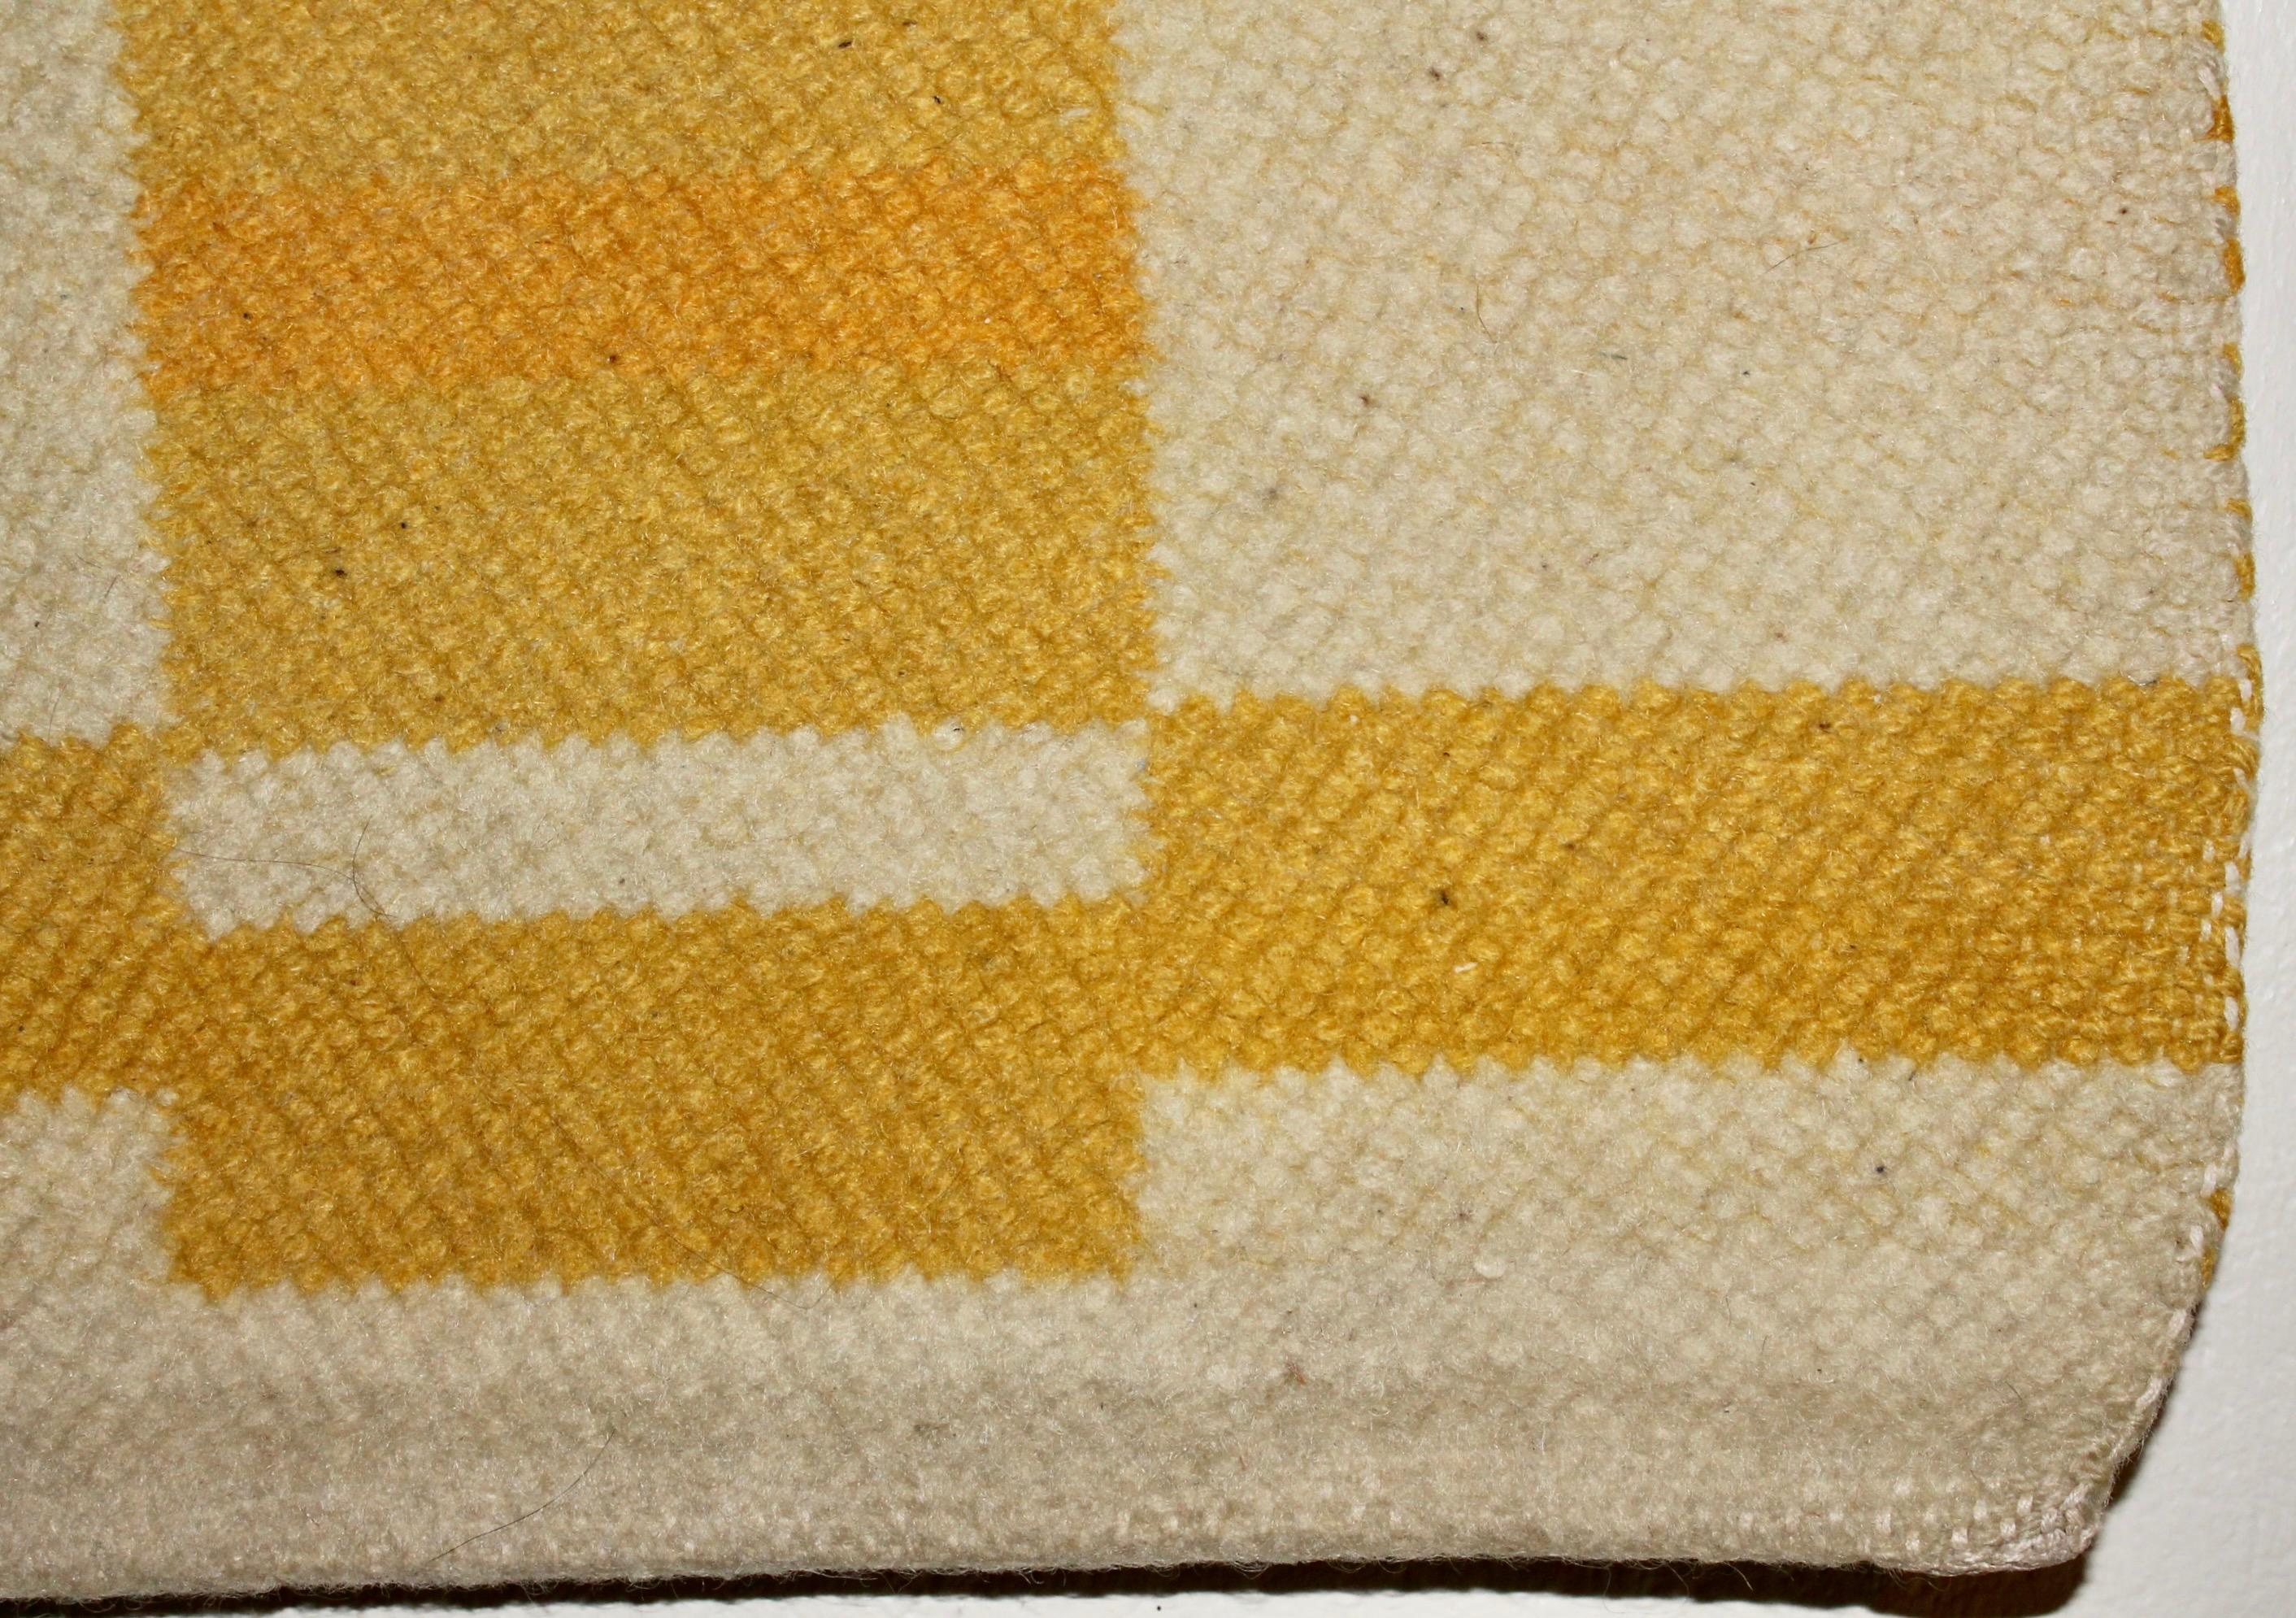 A period hand woven horizontal rectangles in two yellows and off white in a strict 'implied verticals' geometric Bauhaus or Black Mountain Design. Approximately 26 x 25.75 x 3/8